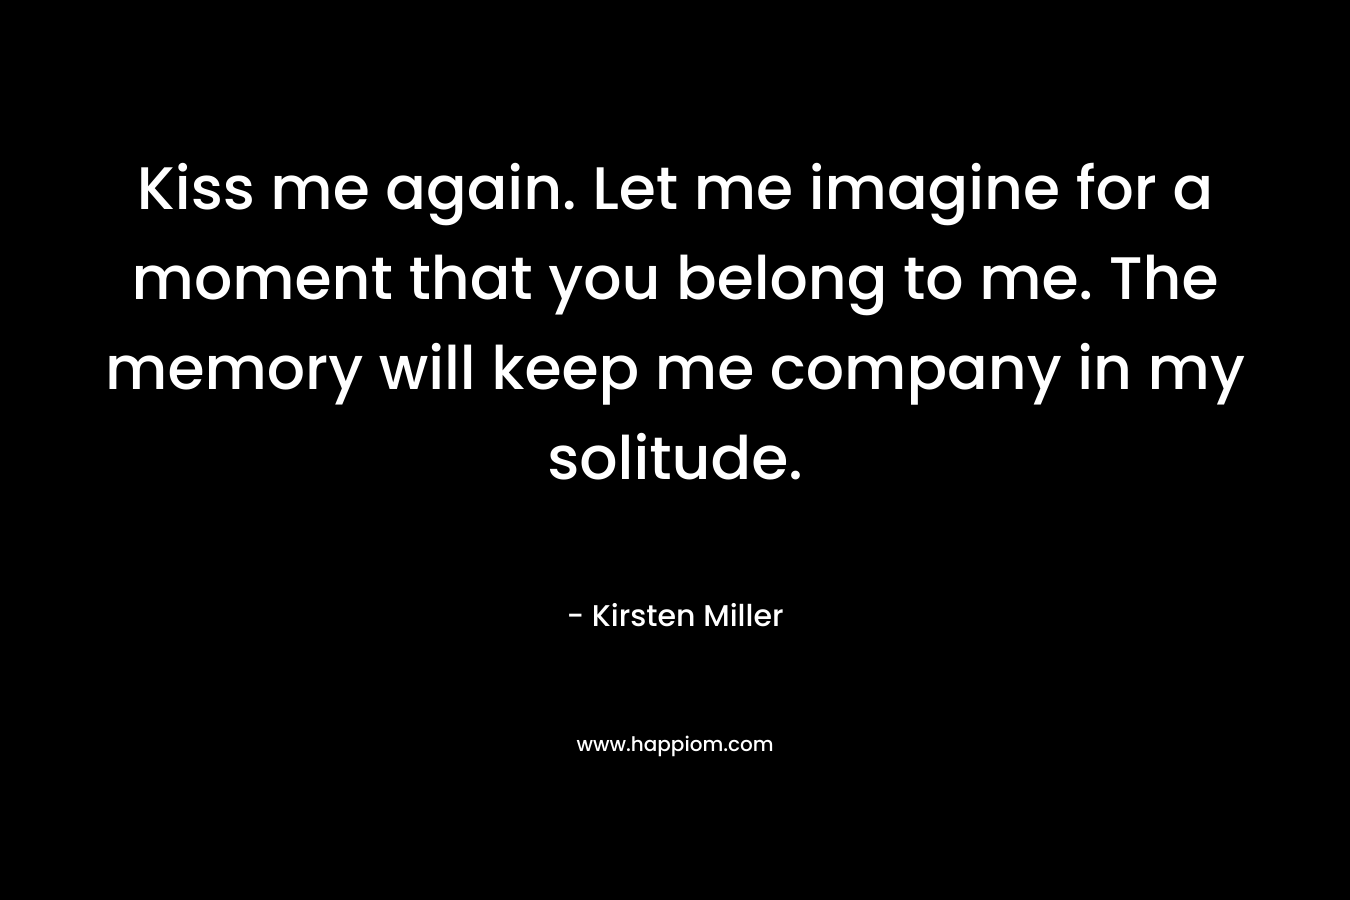 Kiss me again. Let me imagine for a moment that you belong to me. The memory will keep me company in my solitude. – Kirsten Miller